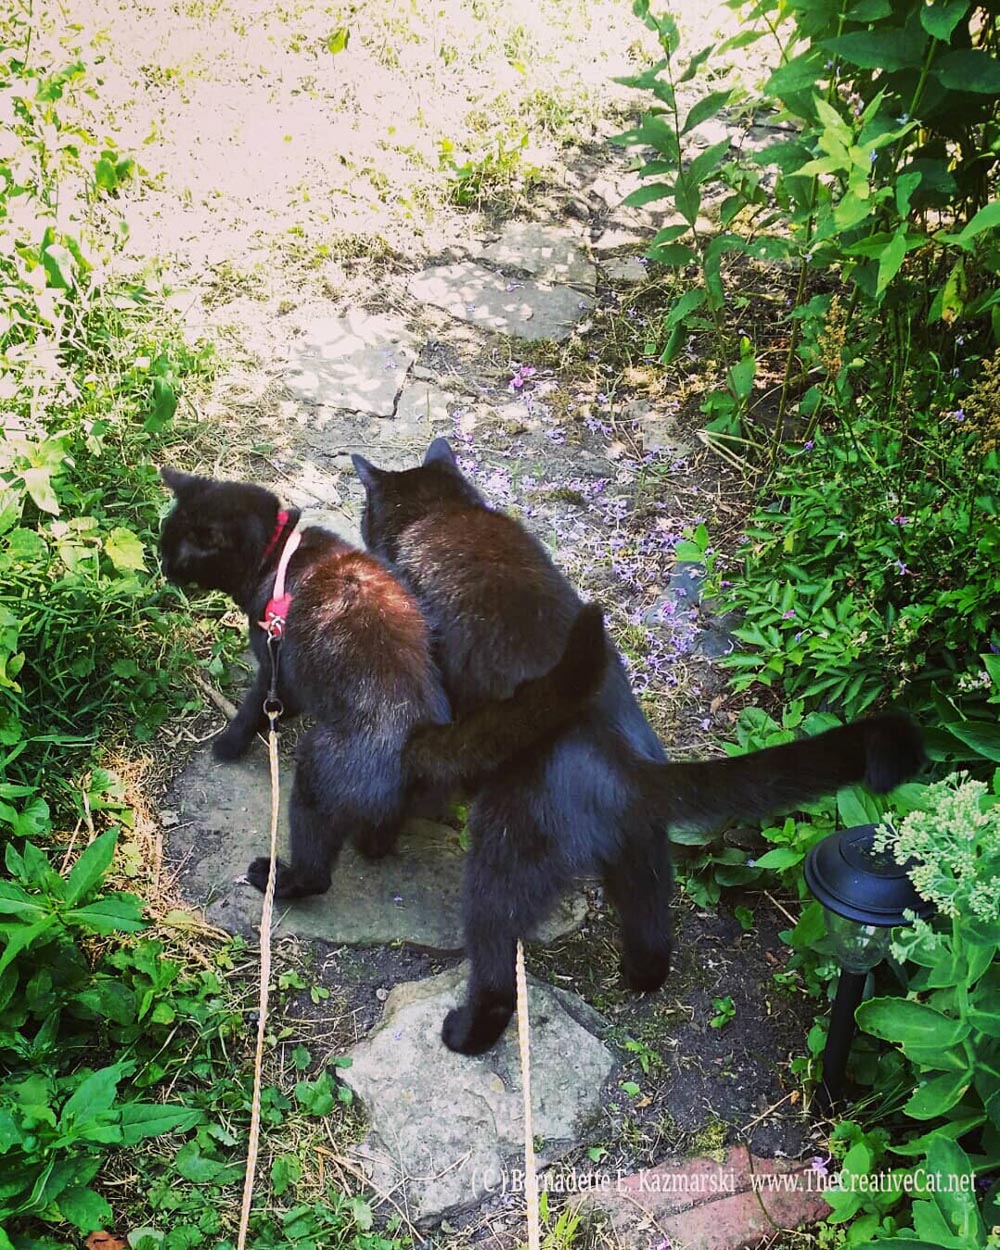 Mimi and Mewsette hurrying outside.